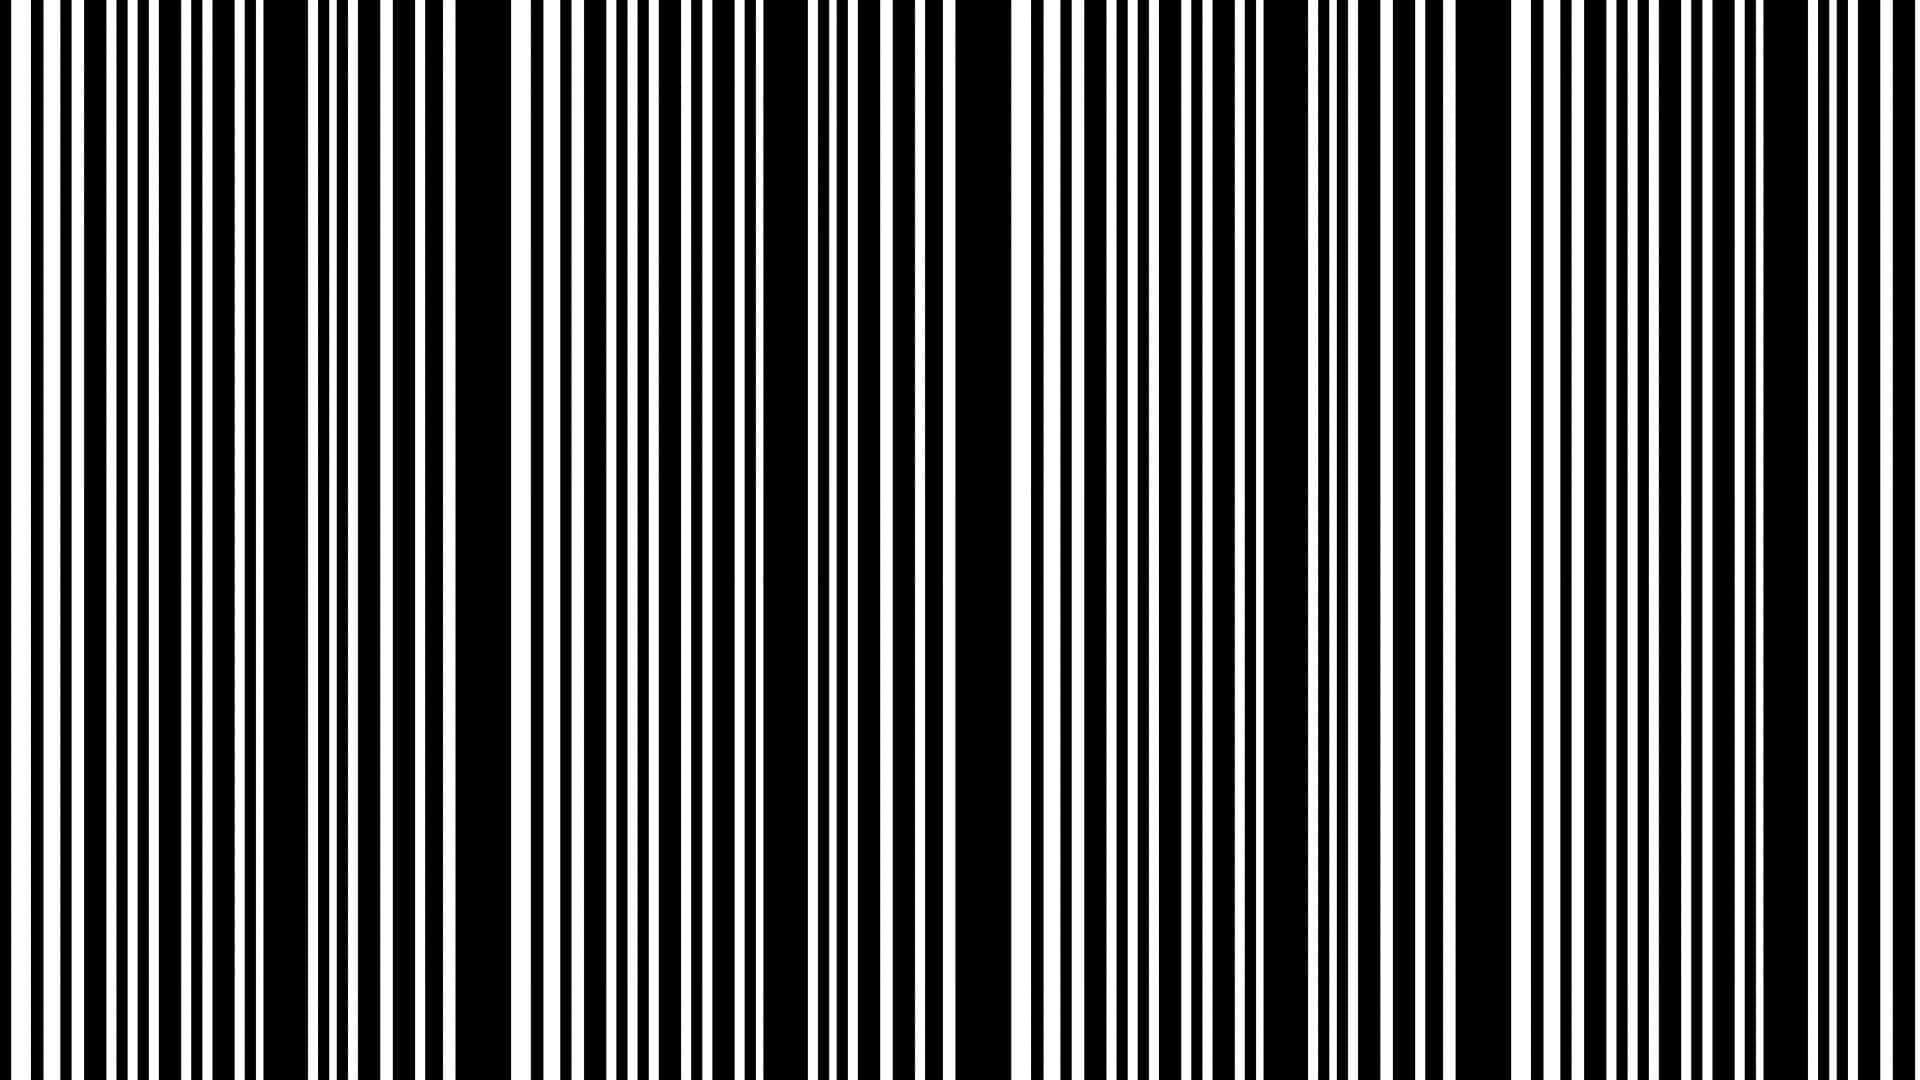 Classic Black and White Striped Background